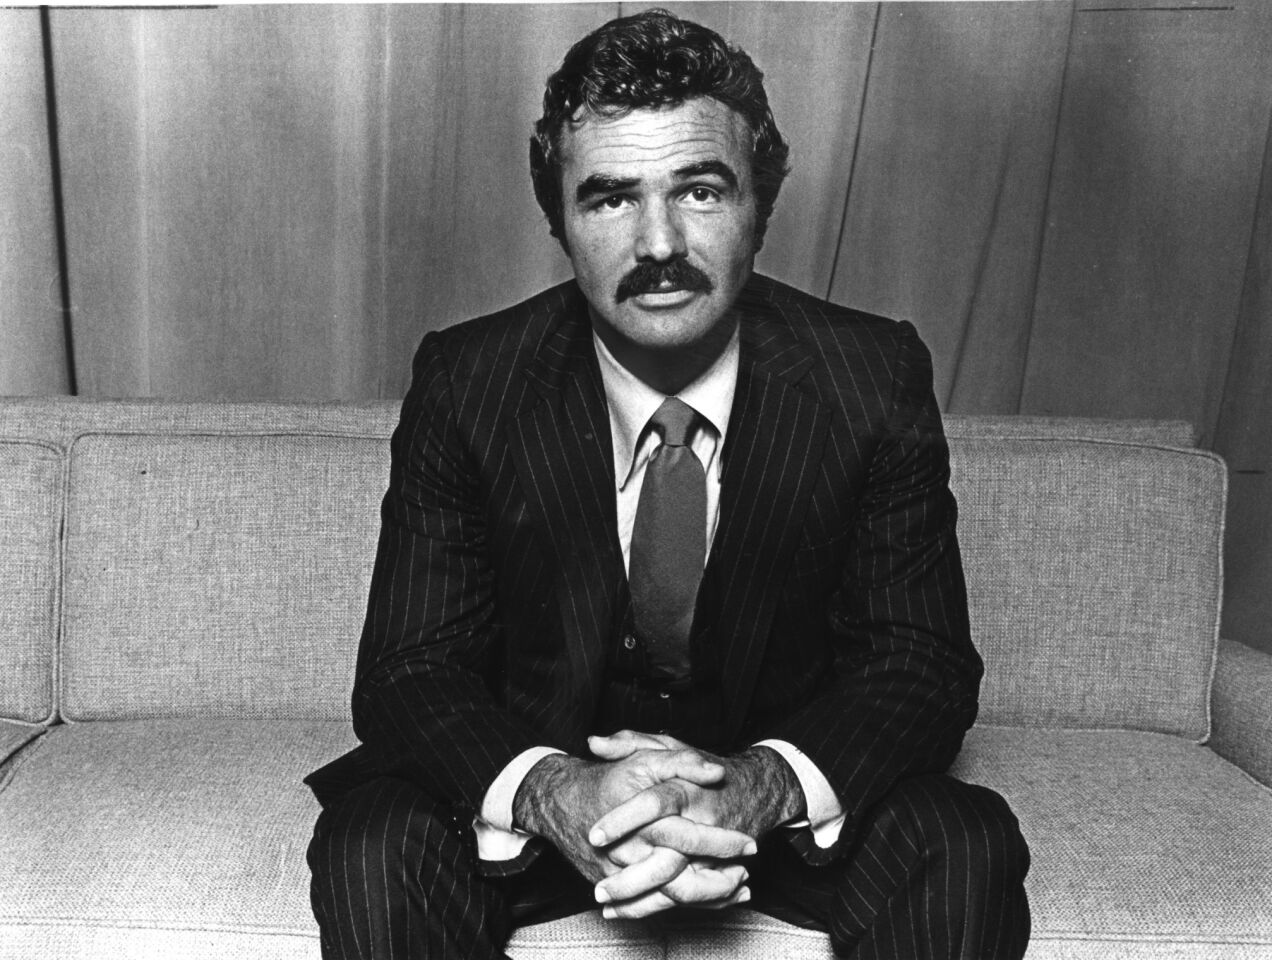 Burt Reynolds sits for a photo as he receives an award at UCLA in 1980.